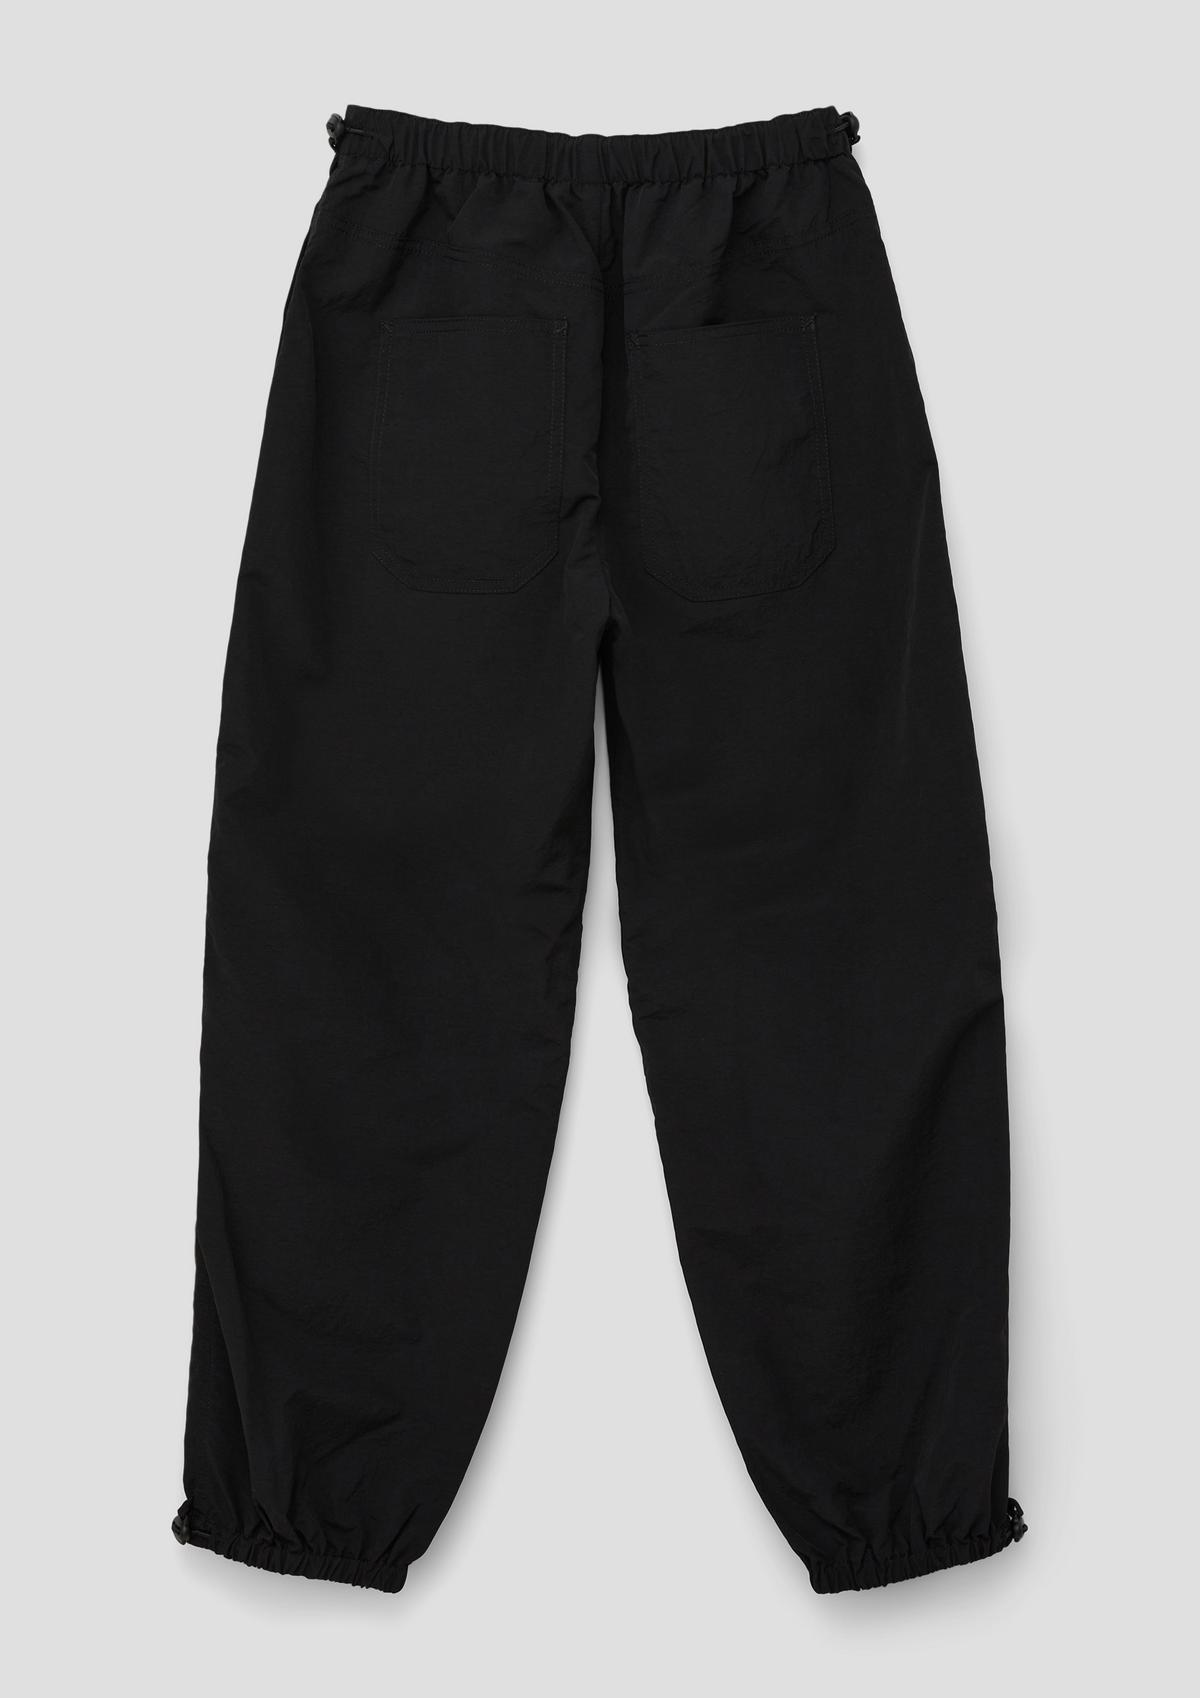 s.Oliver Parachute trousers with a straight leg